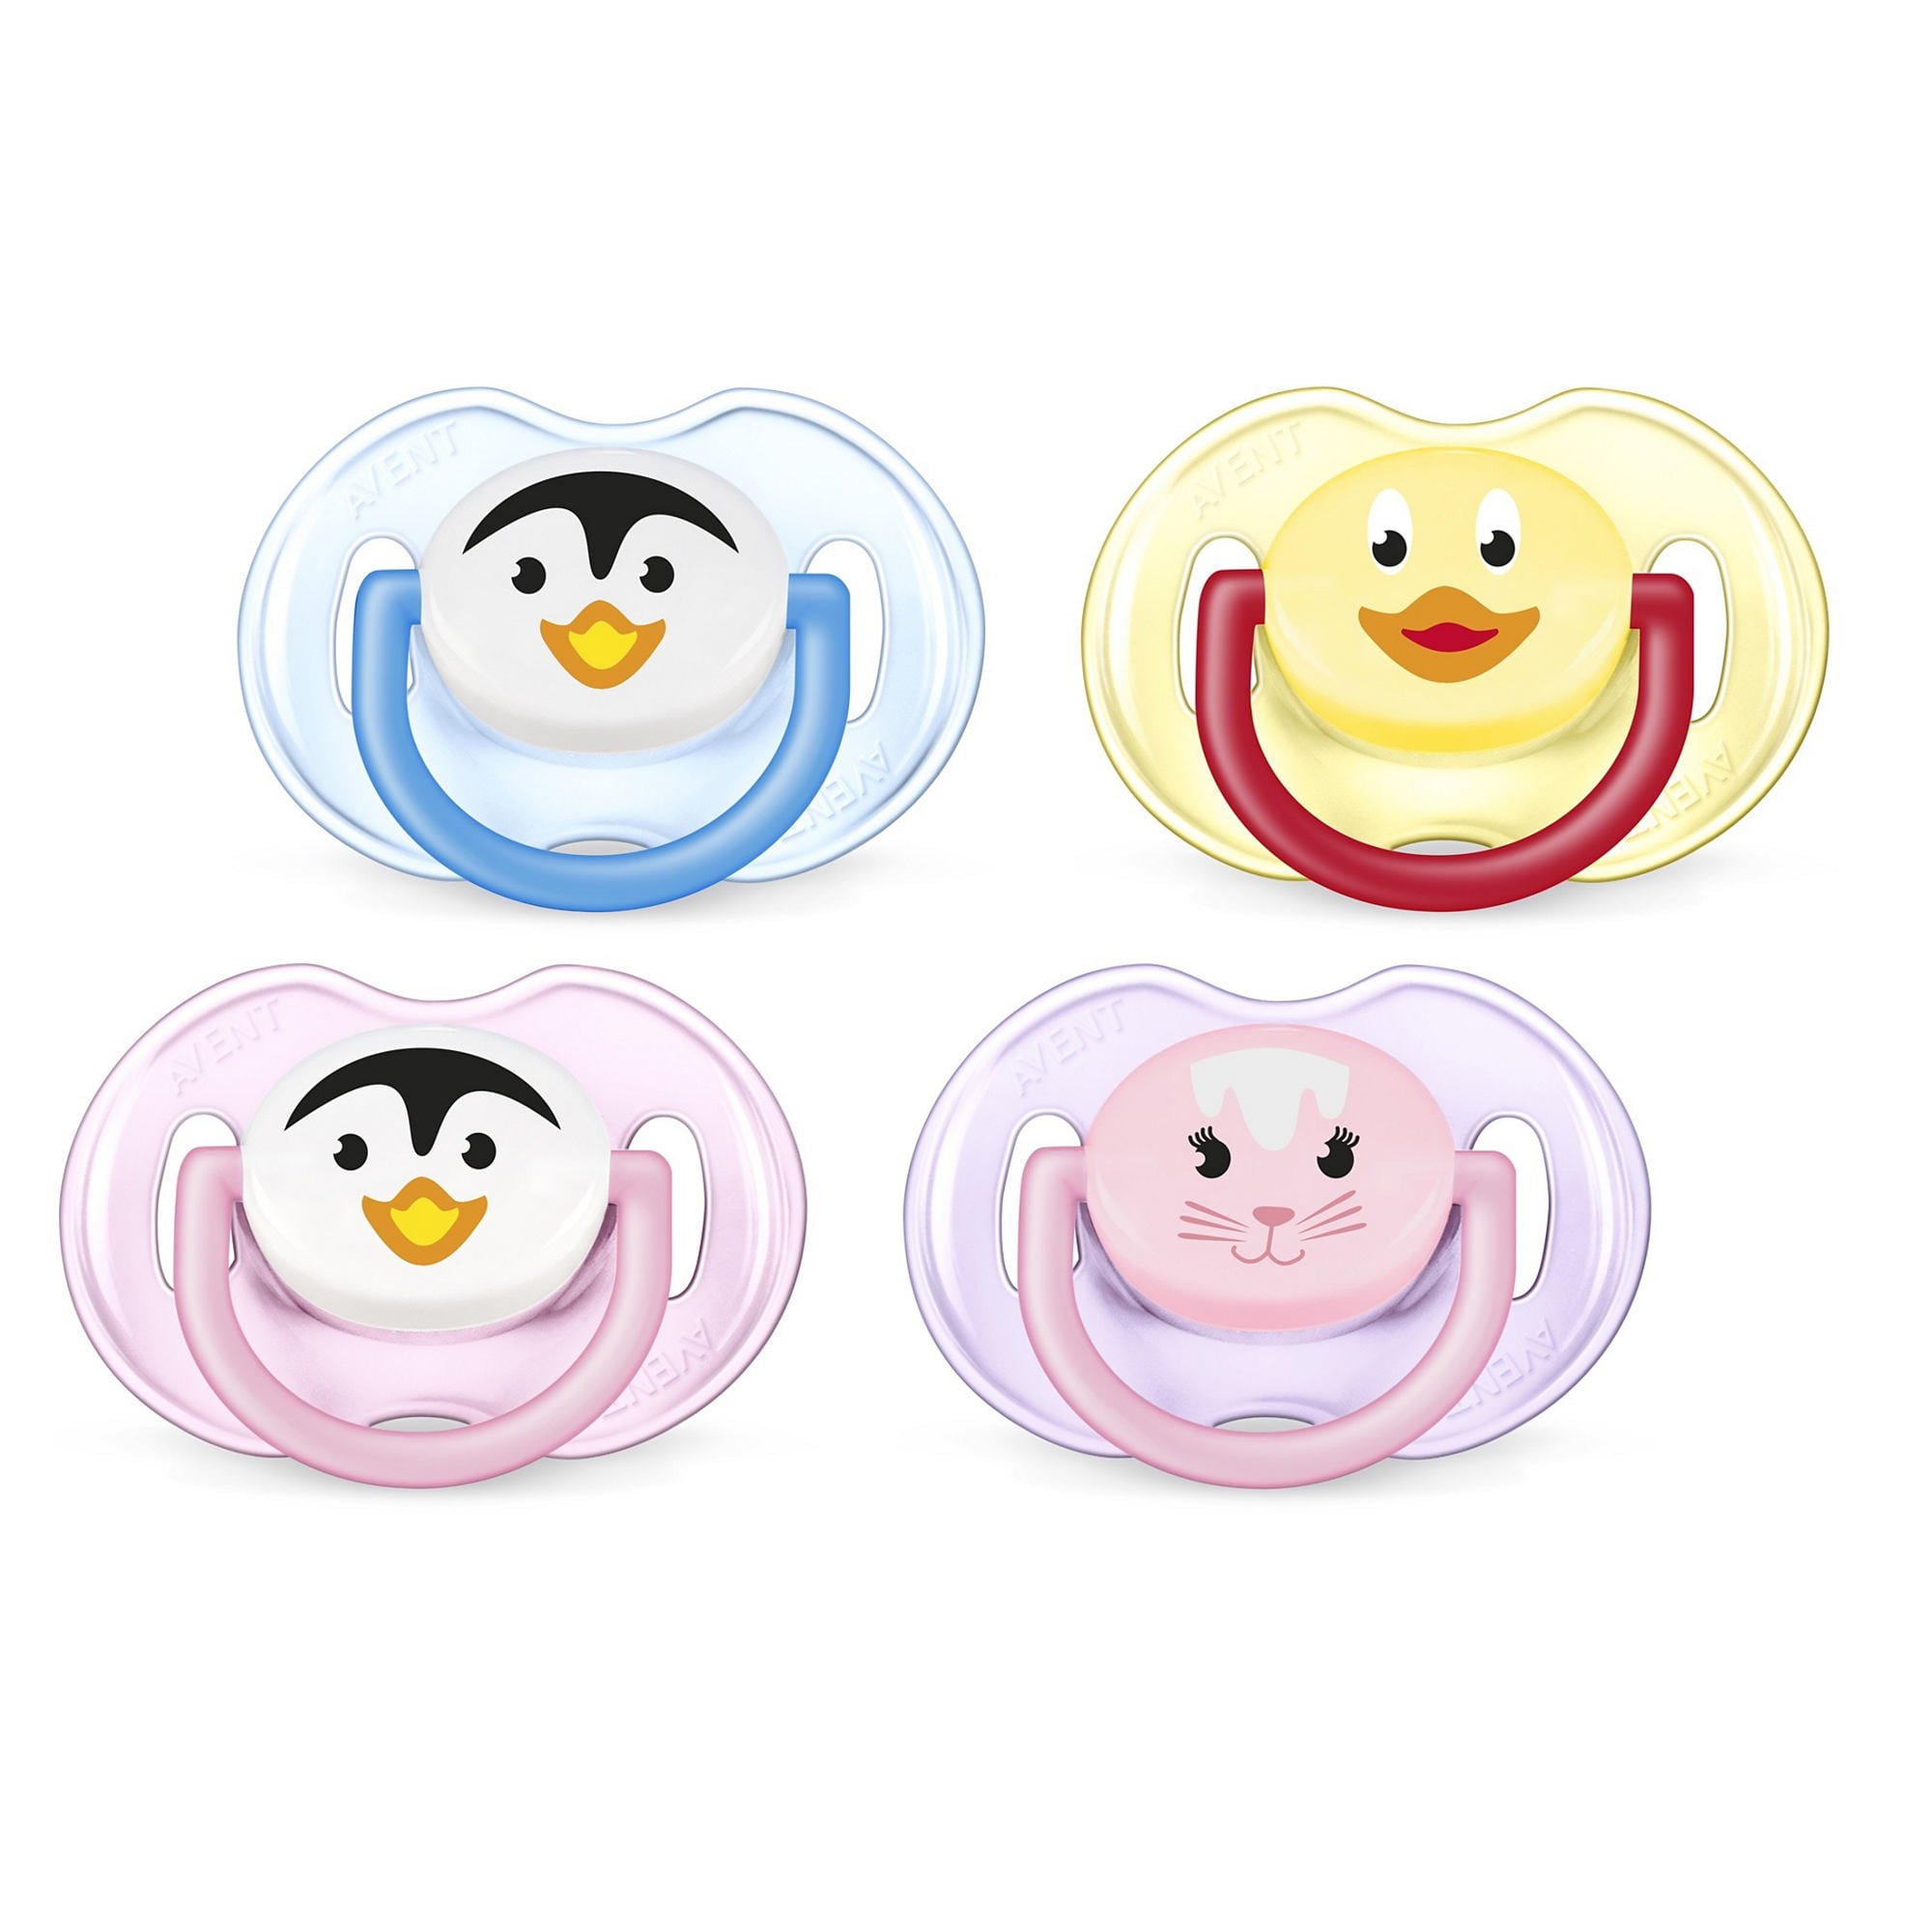 Philips Avent Orthodontic Pacifier, 0-6 months, Various Animal Designs, 2  pack, SCF182/23 (Design may vary) 